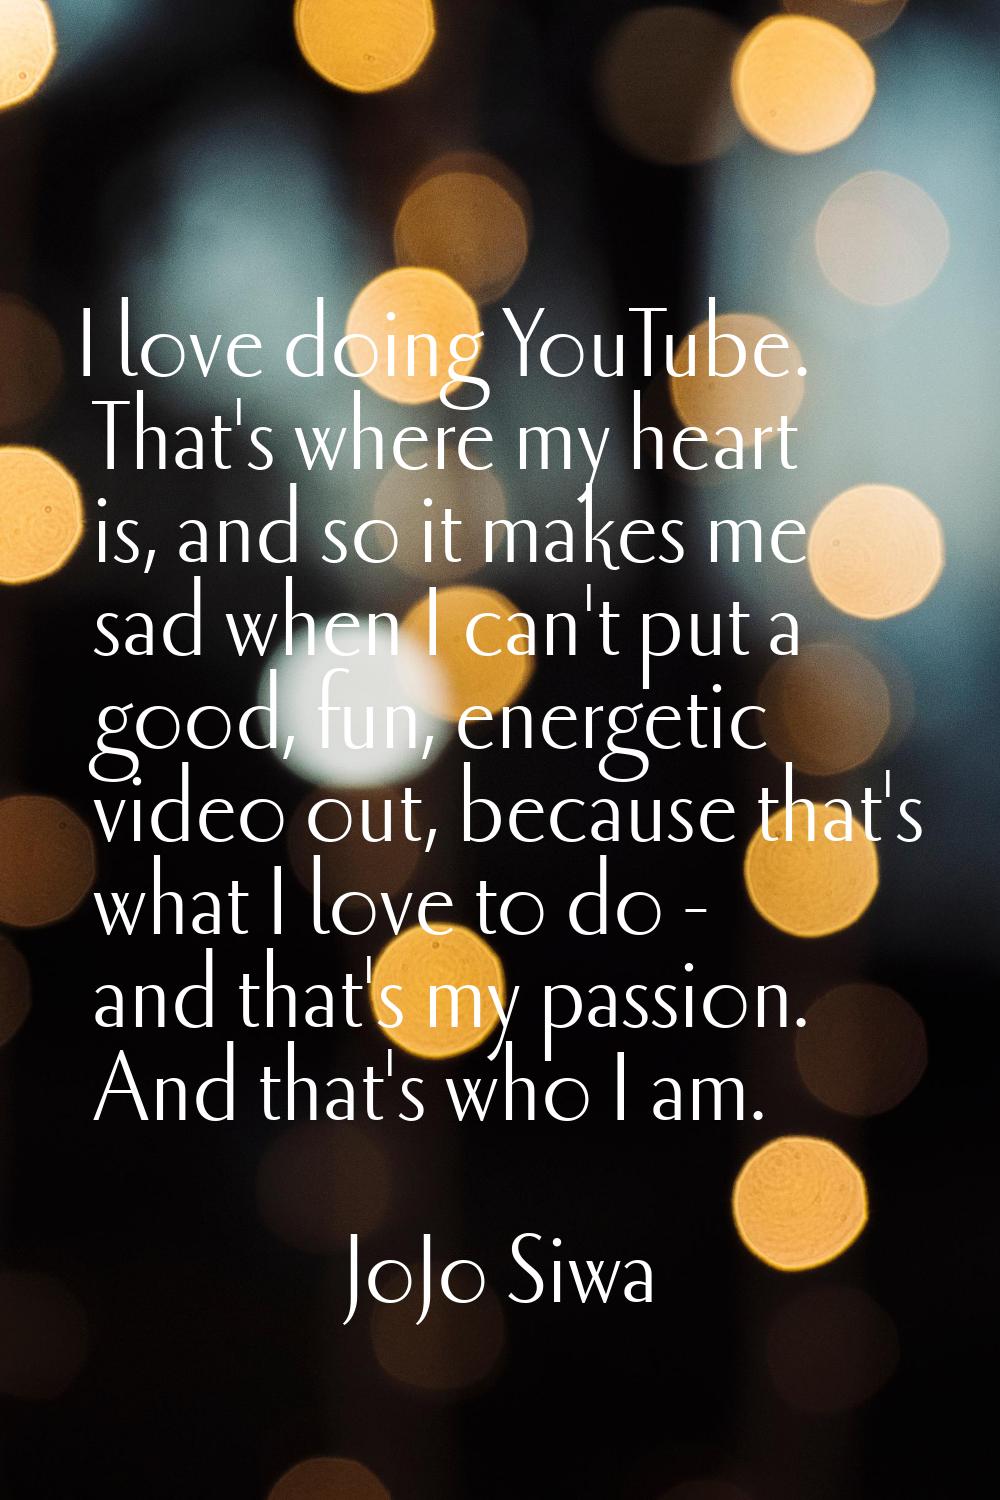 I love doing YouTube. That's where my heart is, and so it makes me sad when I can't put a good, fun